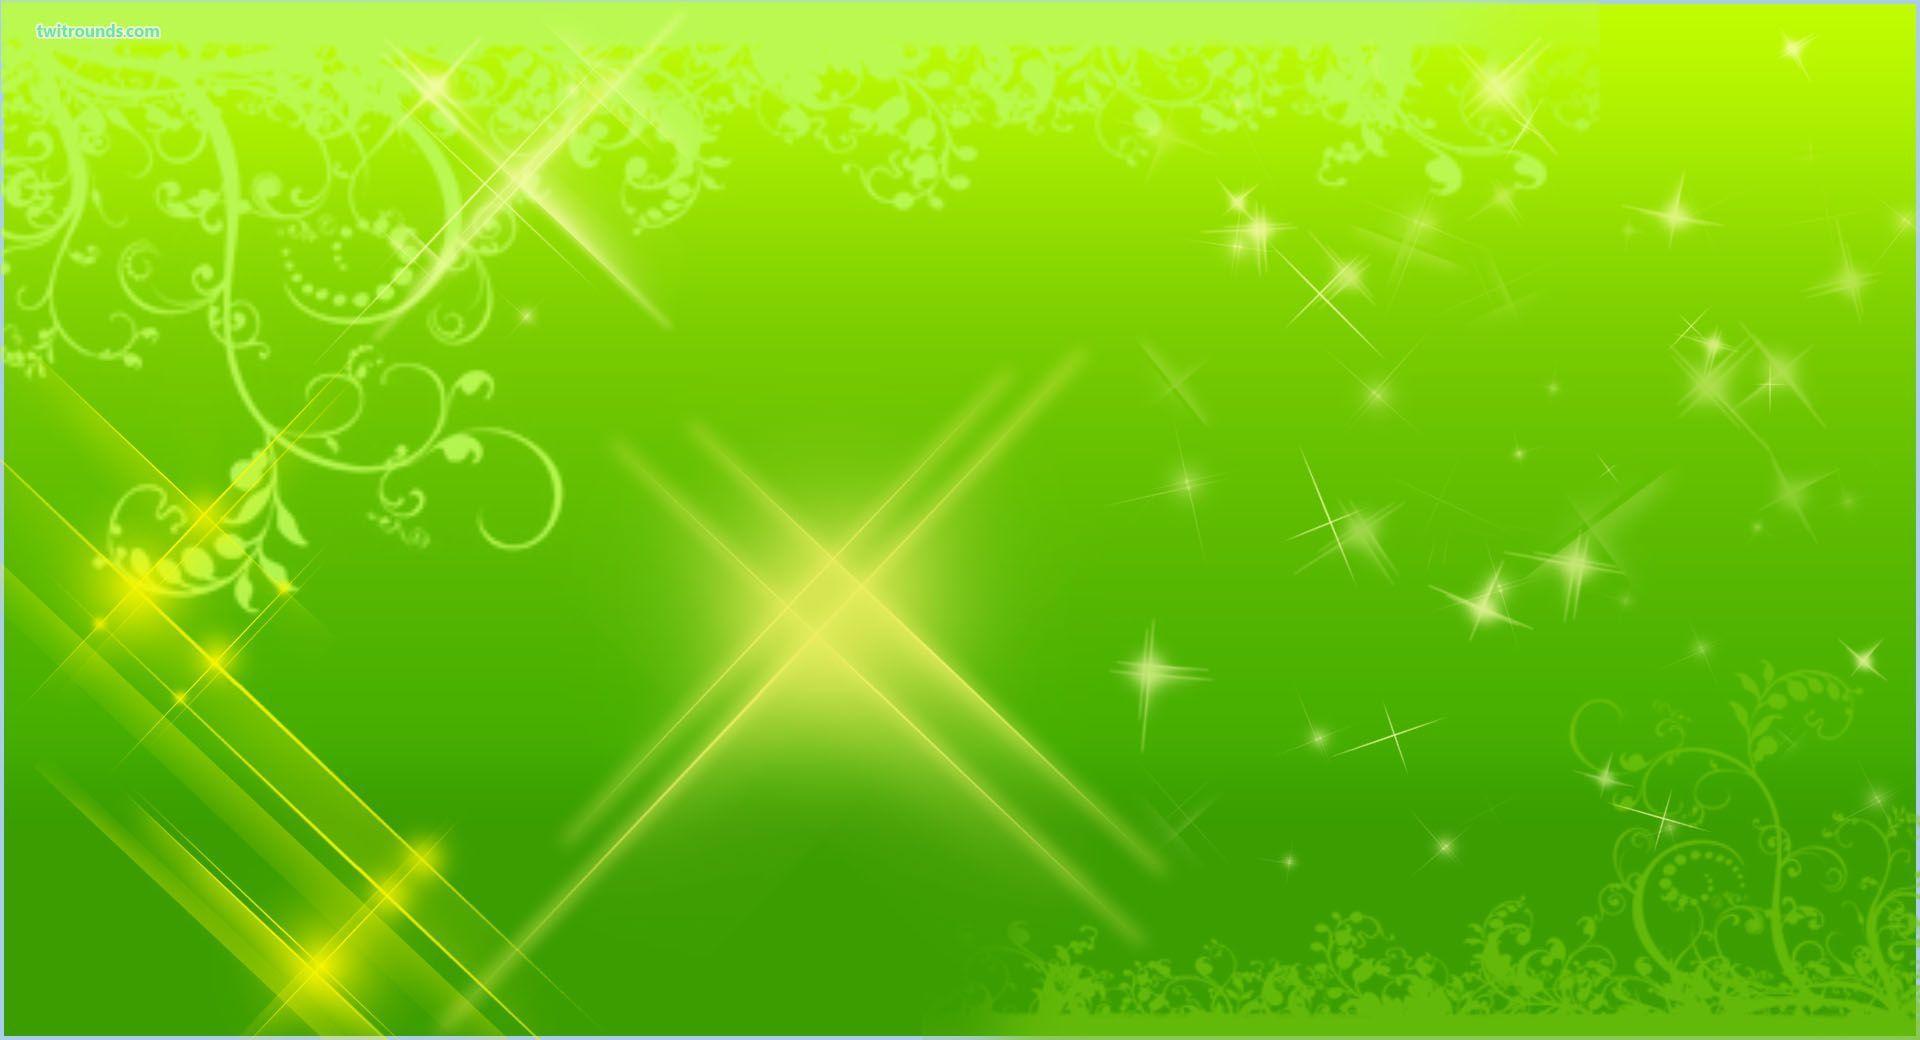 Green Backgrounds Image - Wallpaper Cave